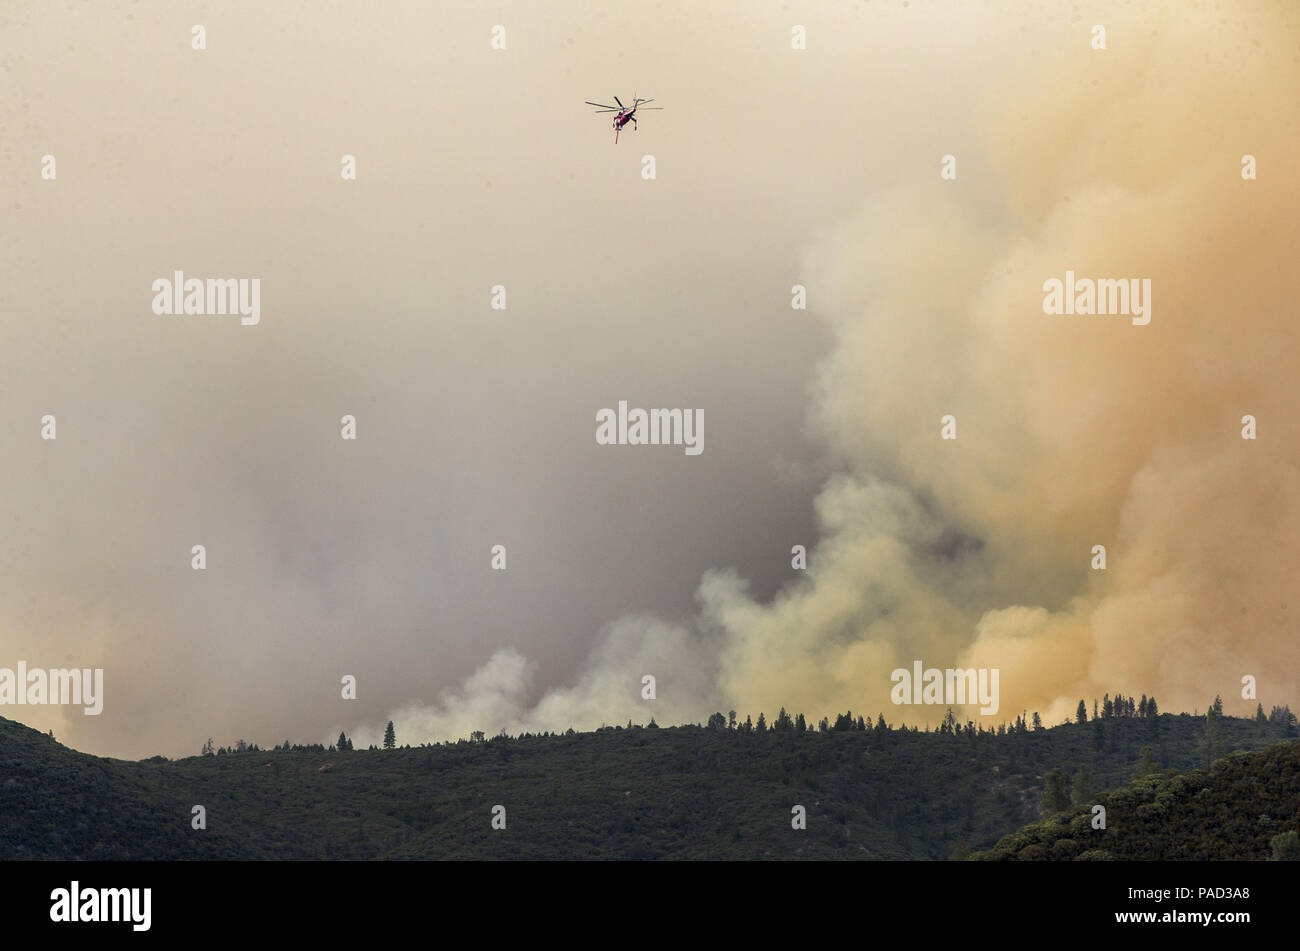 Mariposa, California, U.S.A. 21st July, 2018. A Helicopter looks dwarfed next to the raging smoke. The Ferguson Fire in Mariposa County just west of Yosemite National Park has burned over 29,000 acres and is 6% contained as of Saturday July 21, 2018 according to U.S. Forest Service. Credit: Marty Bicek/ZUMA Wire/Alamy Live News Stock Photo